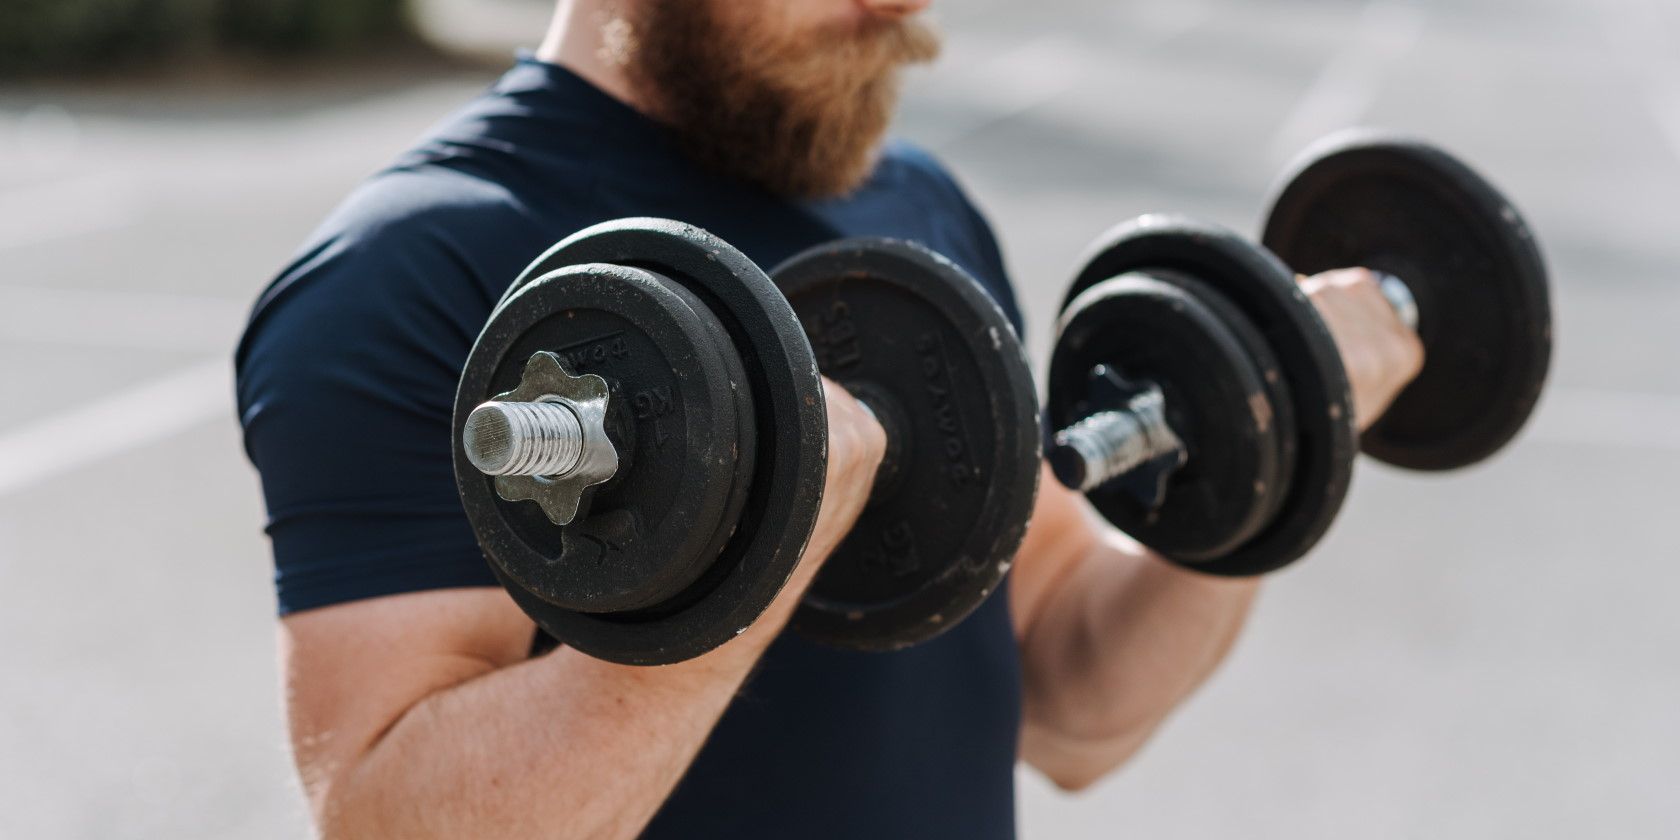 Man exercising outside and lifting two black dumbbells